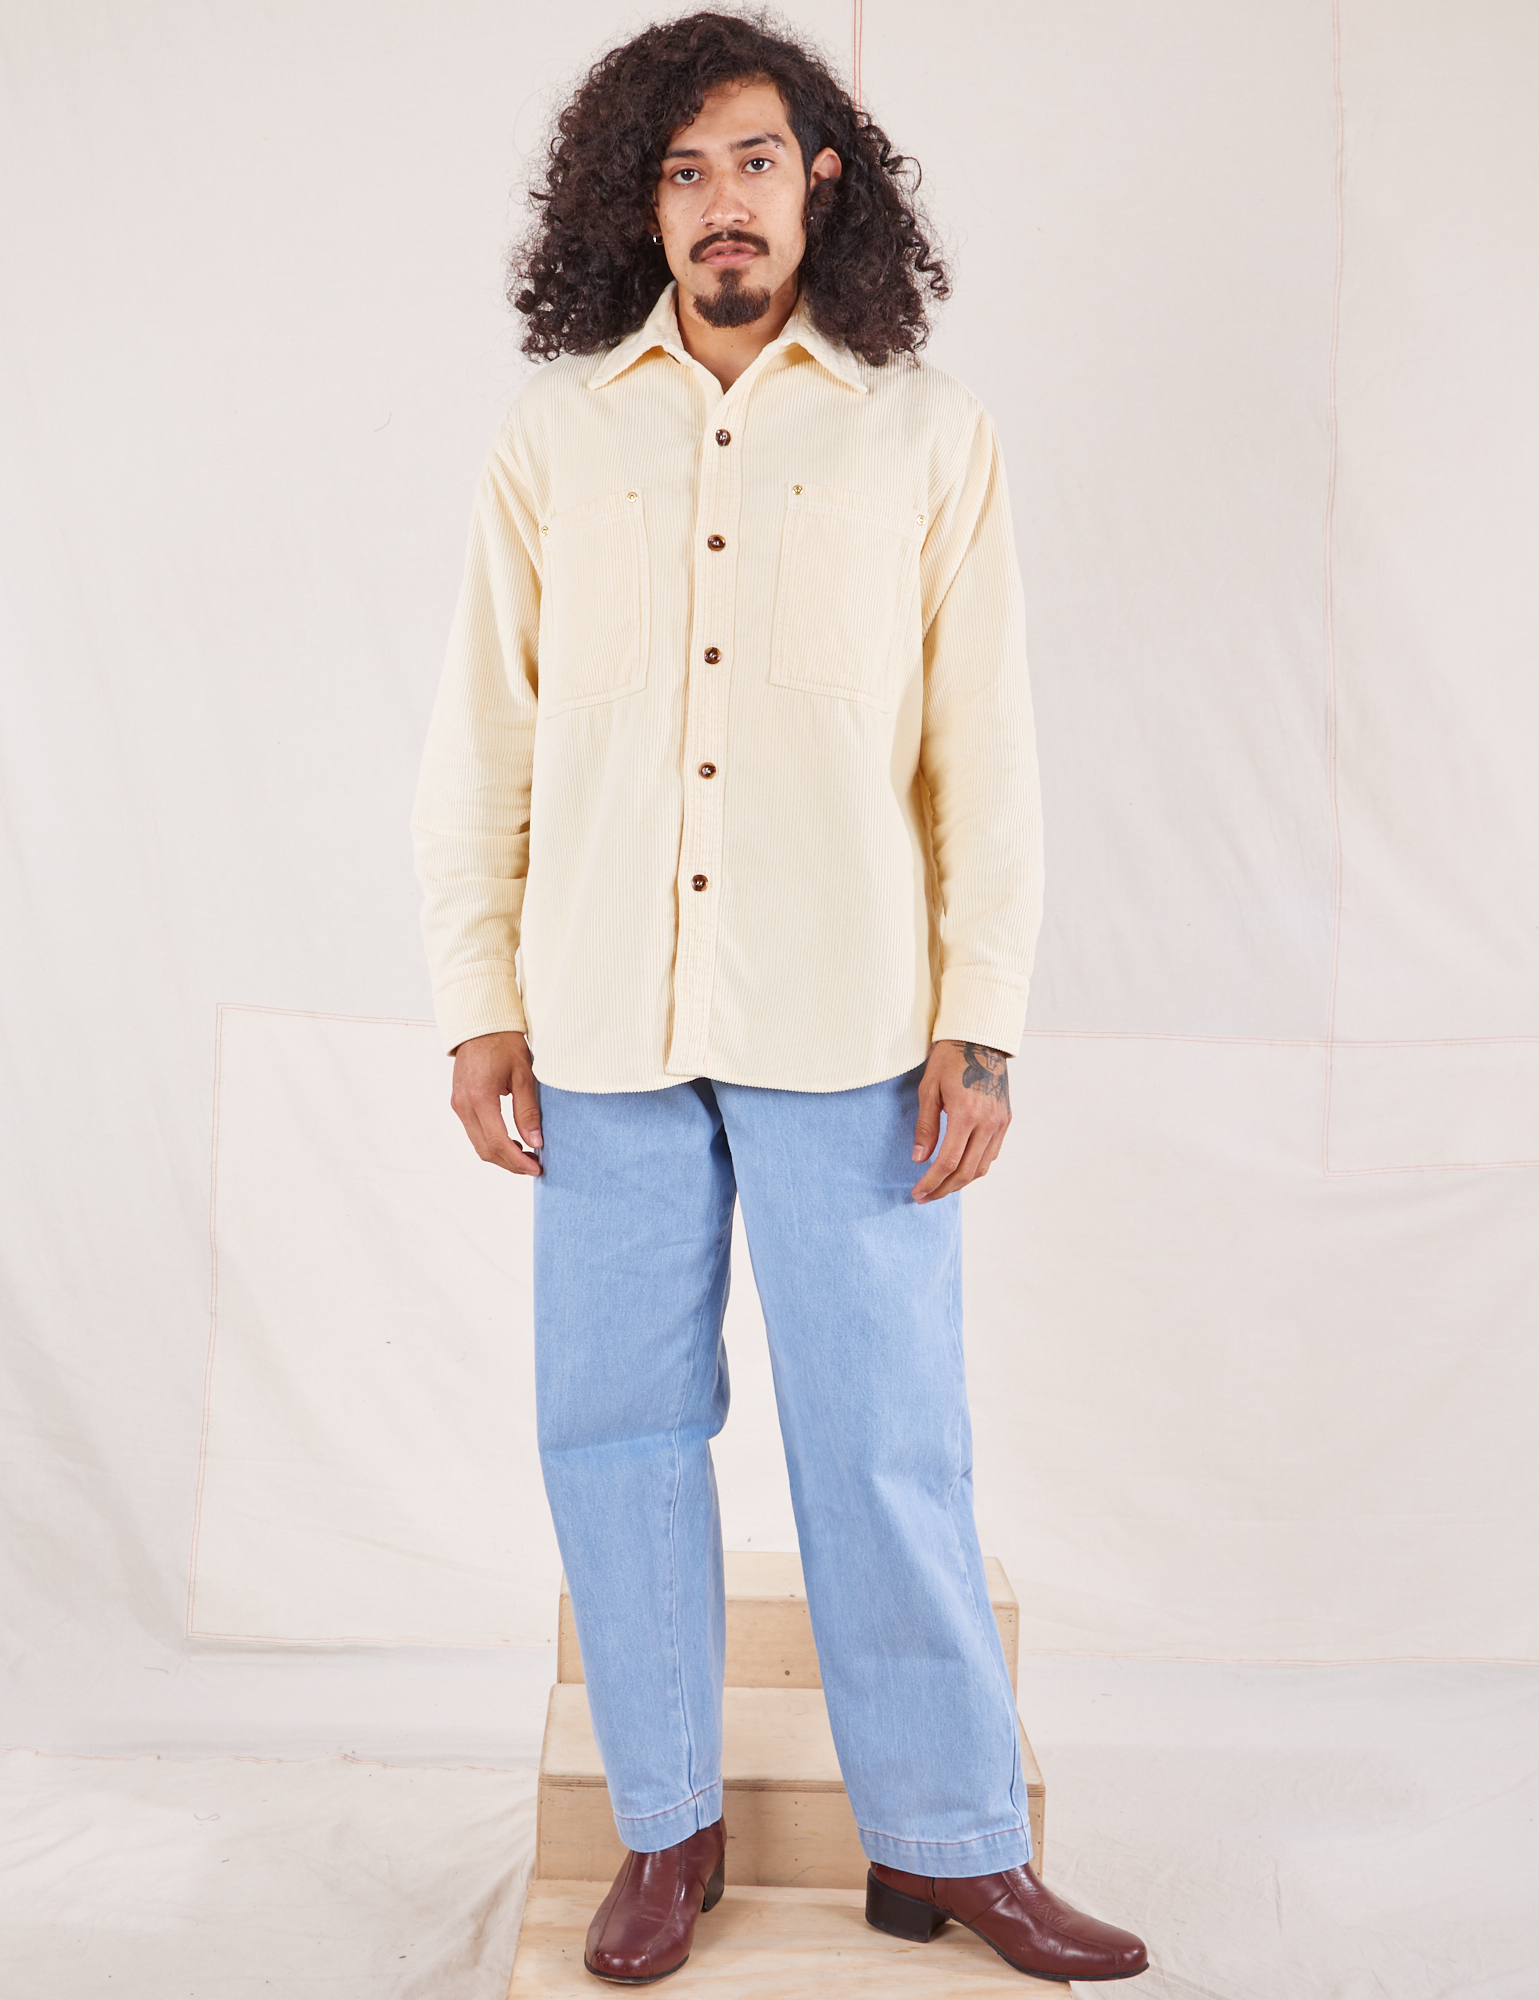 Jesse is 5&#39;8&quot; and wearing XS Corduroy Overshirt in Vintage Off-White paired with light wash Denim Trouser Jeans